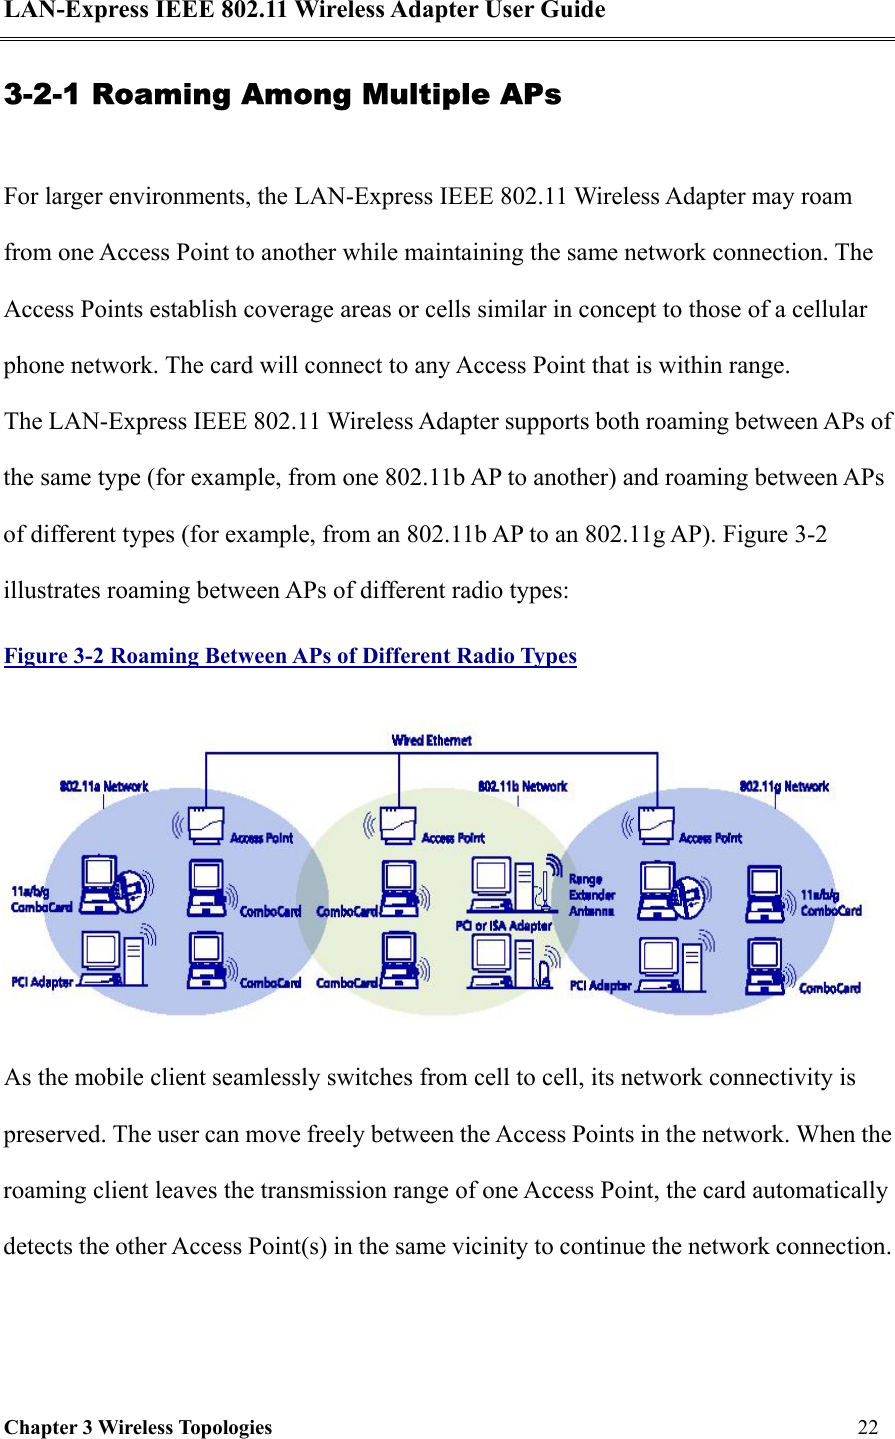 LAN-Express IEEE 802.11 Wireless Adapter User Guide Chapter 3 Wireless Topologies   22  3-2-1 Roaming Among Multiple APs For larger environments, the LAN-Express IEEE 802.11 Wireless Adapter may roam from one Access Point to another while maintaining the same network connection. The Access Points establish coverage areas or cells similar in concept to those of a cellular phone network. The card will connect to any Access Point that is within range. The LAN-Express IEEE 802.11 Wireless Adapter supports both roaming between APs of the same type (for example, from one 802.11b AP to another) and roaming between APs of different types (for example, from an 802.11b AP to an 802.11g AP). Figure 3-2 illustrates roaming between APs of different radio types: Figure 3-2 Roaming Between APs of Different Radio Types  As the mobile client seamlessly switches from cell to cell, its network connectivity is preserved. The user can move freely between the Access Points in the network. When the roaming client leaves the transmission range of one Access Point, the card automatically detects the other Access Point(s) in the same vicinity to continue the network connection.  